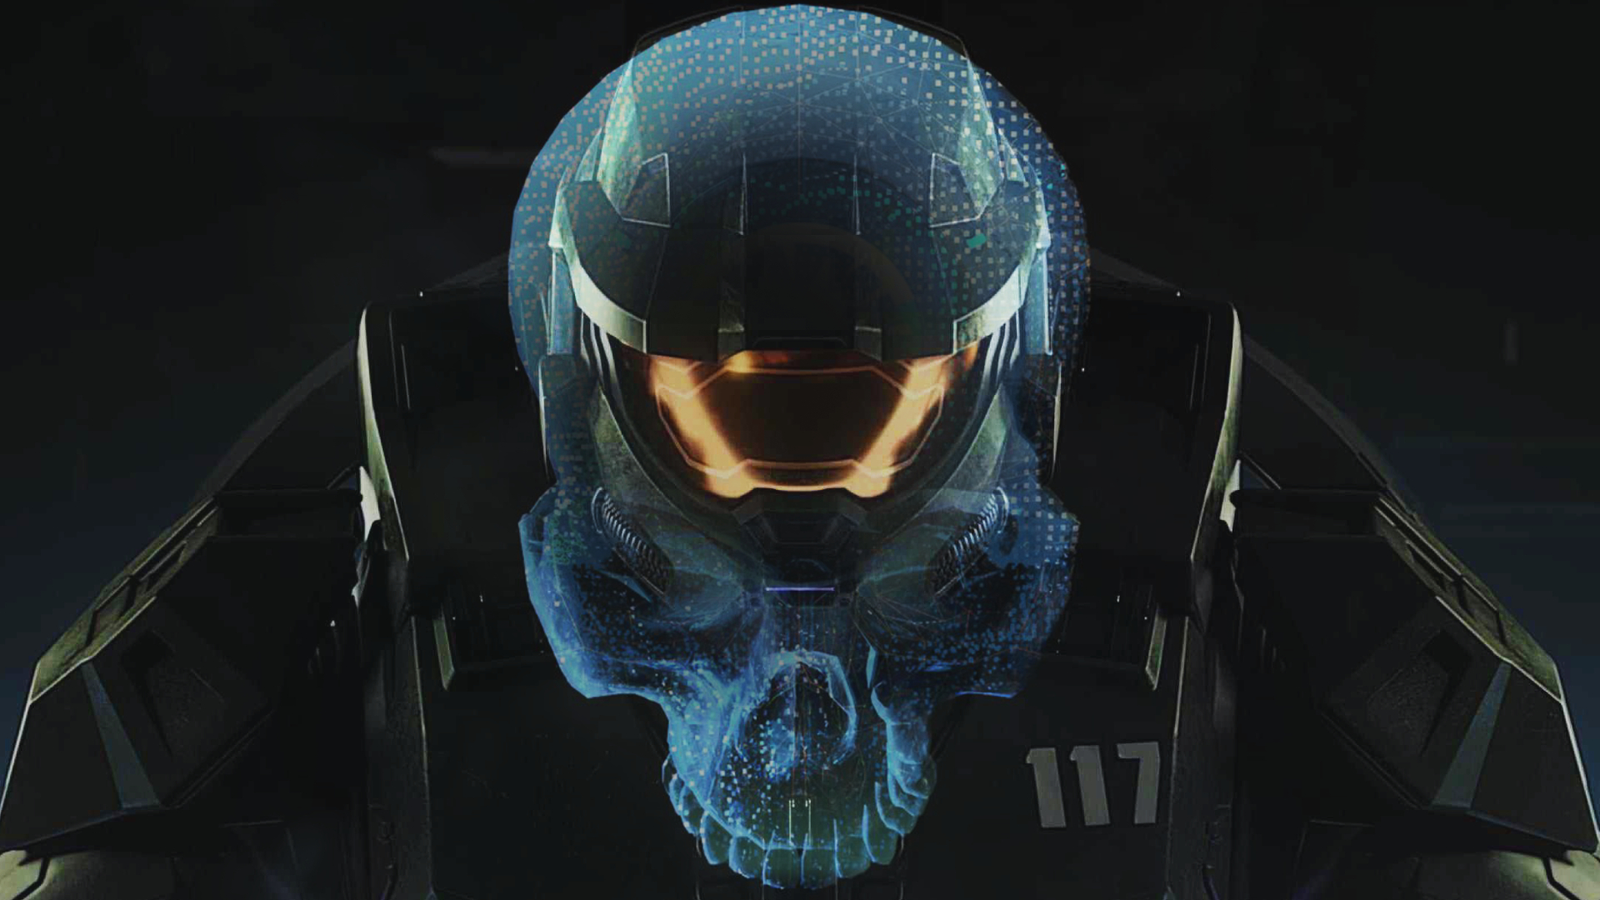 WATCH: The First Trailer For The Long-Awaited 'Halo' Series Is Here